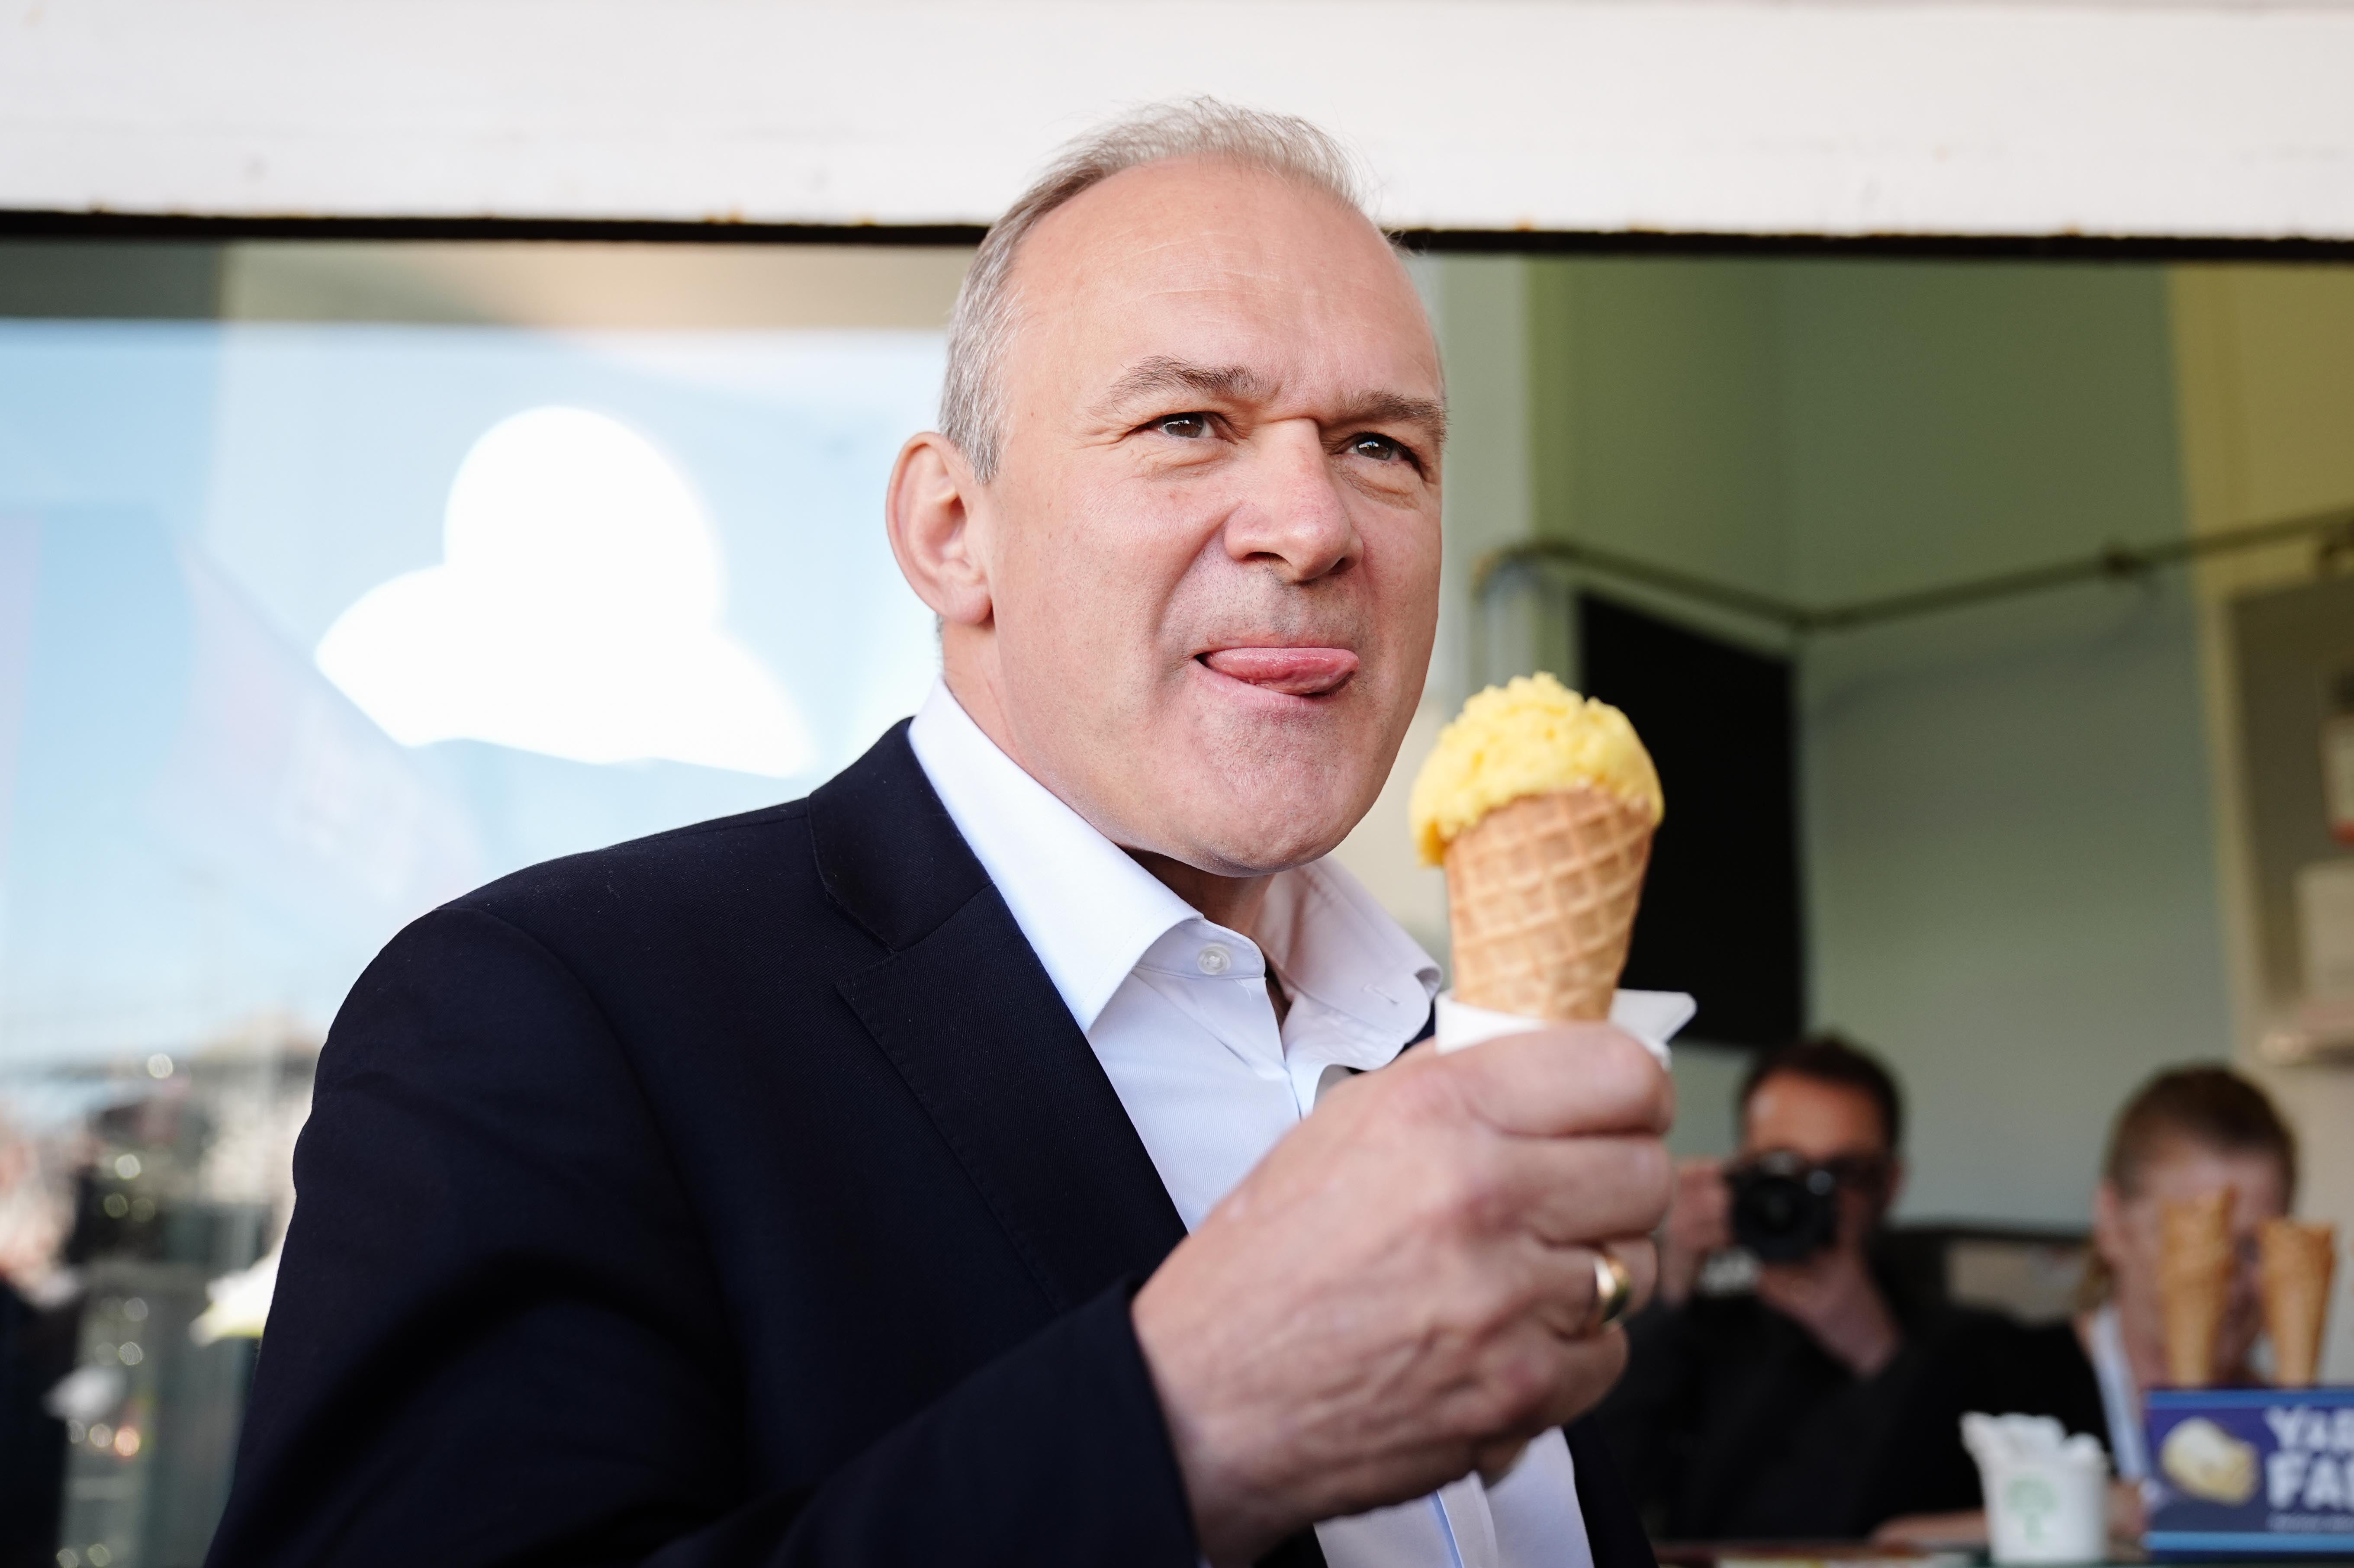 Liberal Democrat leader Sir Ed Davey eats ice cream on the promenade in Eastbourne, East Sussex, while on the General Election campaign trail